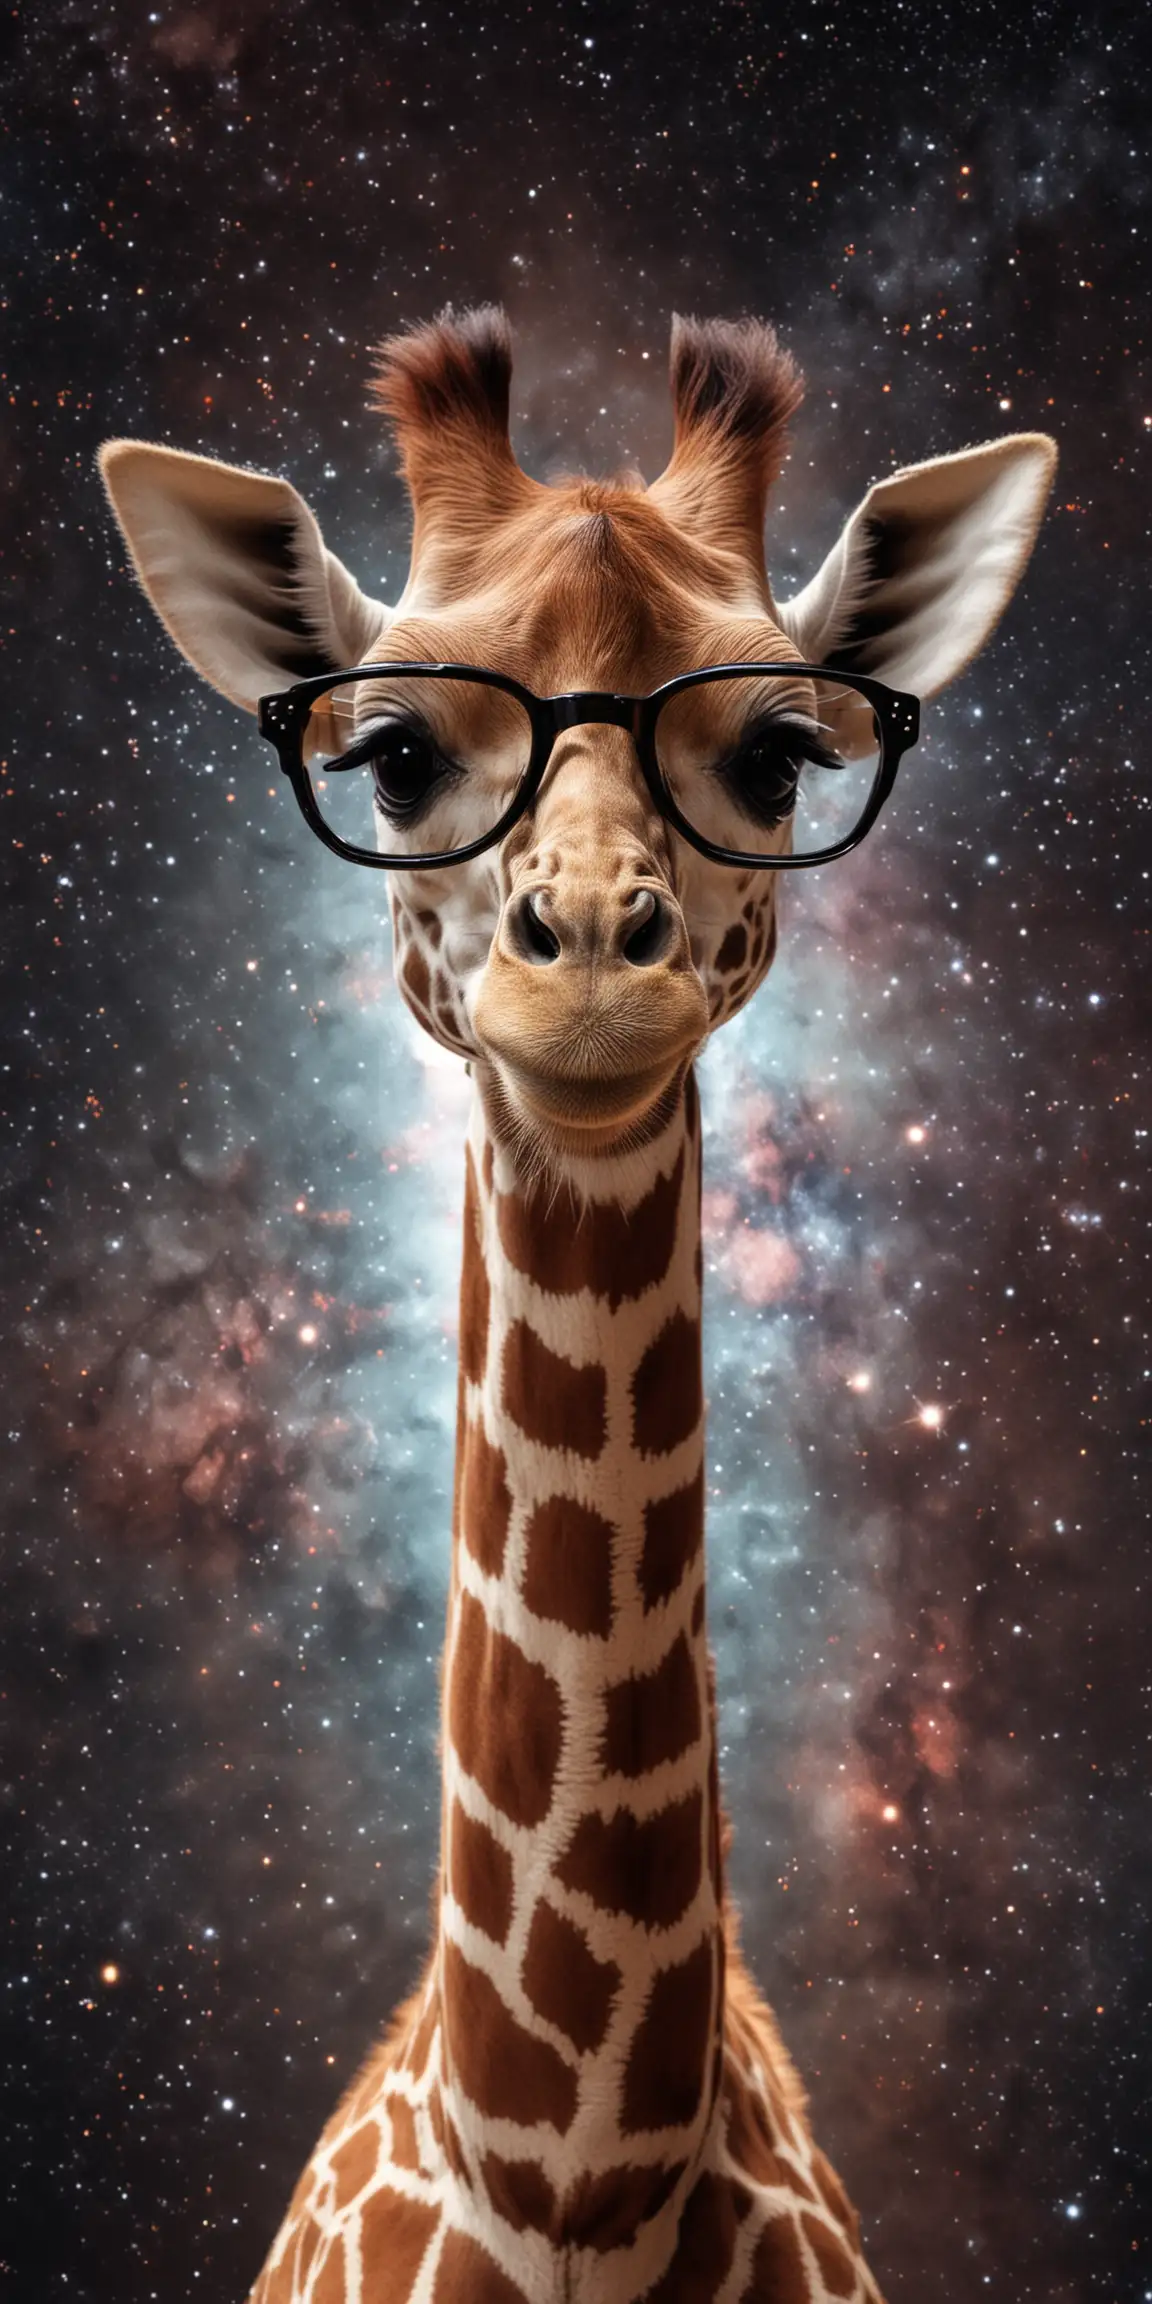 Baby Giraffe with Glasses in Space